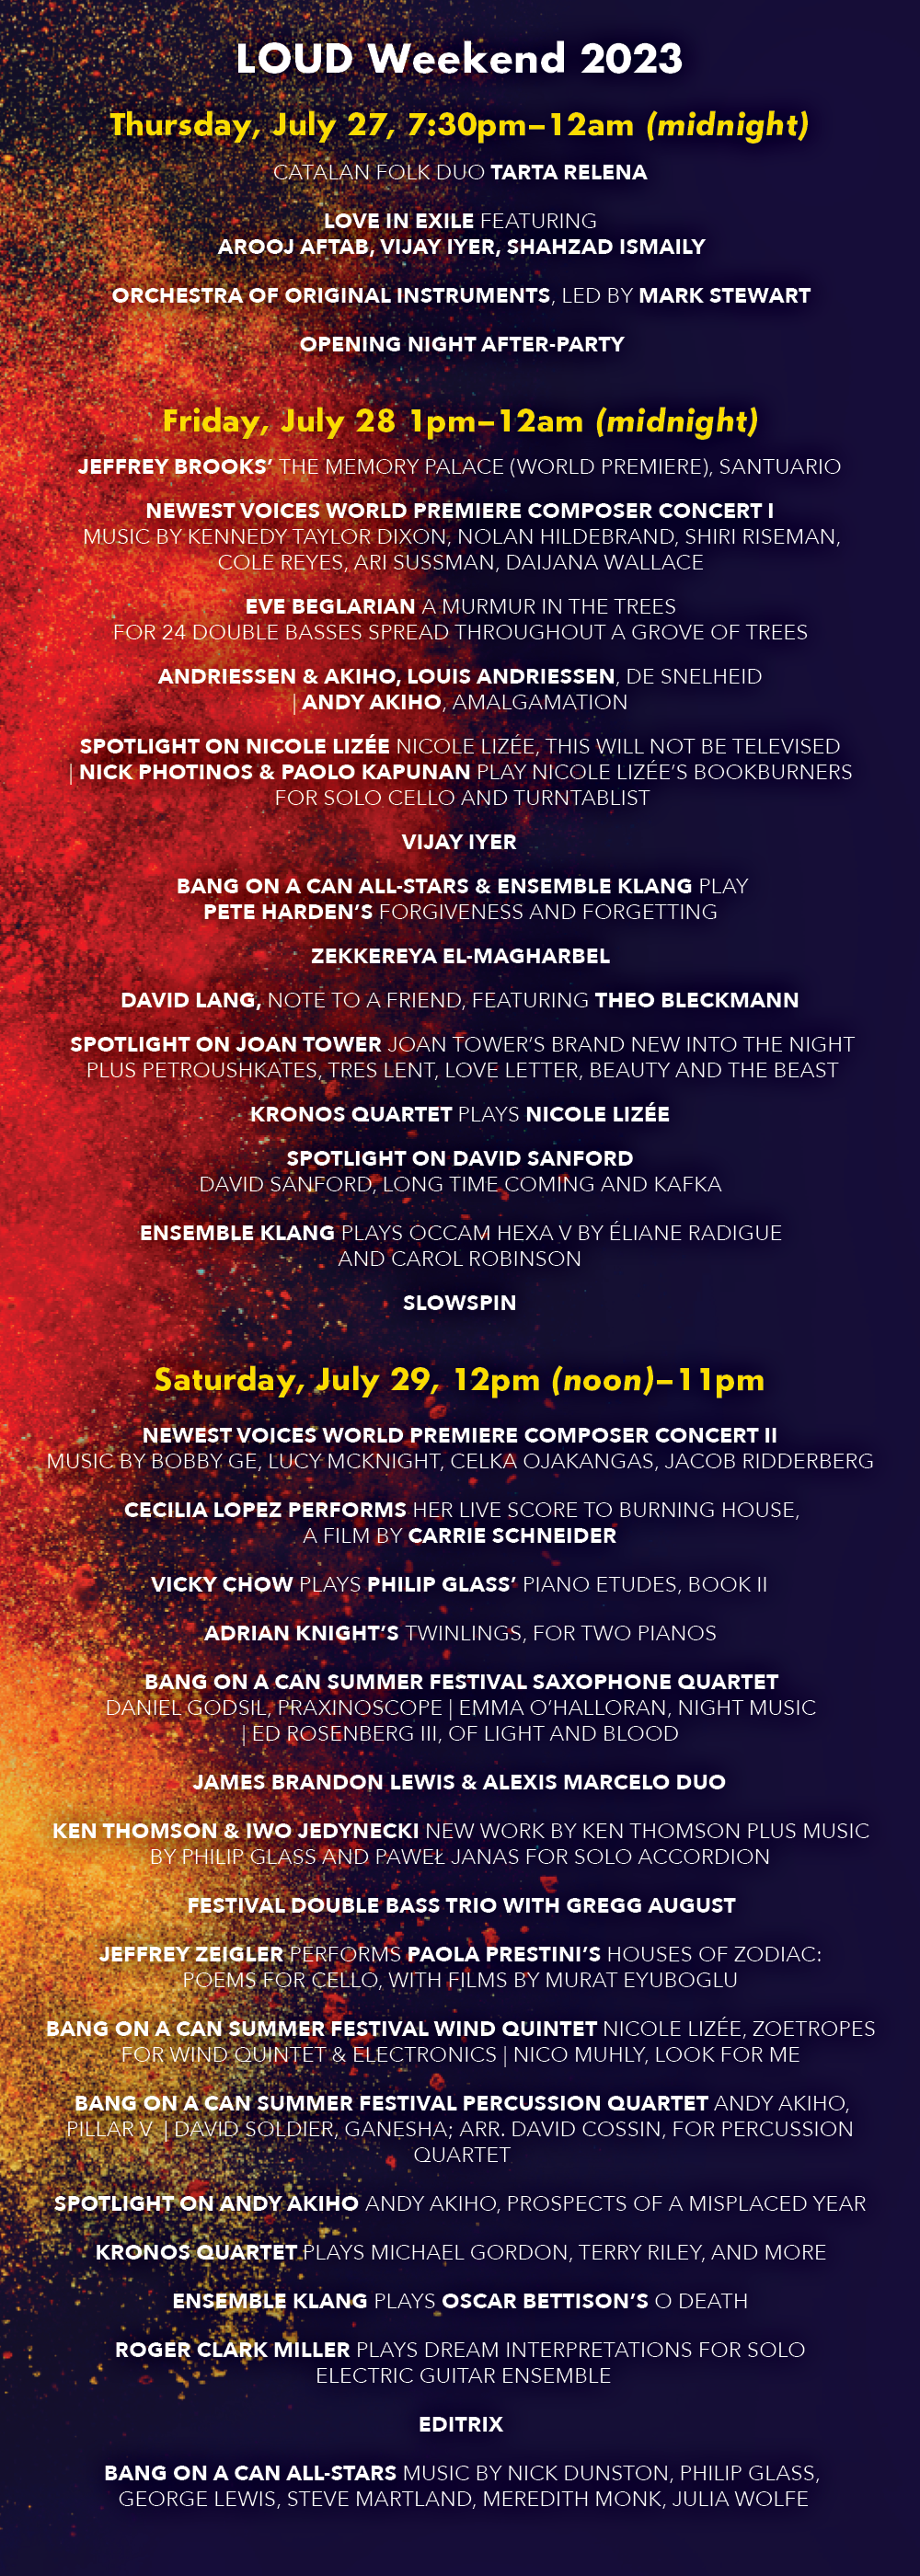 LOUD Weekend 2023 [Subject to change] Thursday, July 27, 7:30pm-12:00am (midnight) Catalan folk duo TARTA RELENA LOVE IN EXILE featuring AROOJ AFTAB, VIJAY IYER, SHAHZAD ISMAILY ORCHESTRA OF ORIGINAL INSTRUMENTS, led by MARK STEWART Opening Night After-Party Friday July 28: 1:00pm-12:00am (midnight) JEFFREY BROOKS’ The Memory Palace (World Premiere) NEWEST VOICES WORLD PREMIERE COMPOSER CONCERT I Music by Kennedy Taylor Dixon, Nolan Hildebrand, Shiri Reisman, Cole Reyes, Ari Sussman, Dijana Wallace EVE BEGLARIAN’s A Murmur in the Trees for 24 double basses spread throughout a grove of trees ANDRIESSEN & AKIHO Louis Andriessen, De Snelheid | Andy Akiho, Amalgamation SPOTLIGHT ON NICOLE LIZÉE Nicole Lizée, This Will Not Be Televised | NICK PHOTINOS & PAOLO KAPUNAN play Nicole Lizée’s Bookburners for solo cello and turntablist VIJAY IYER BANG ON A CAN ALL-STARS & ENSEMBLE KLANG play PETE HARDEN’S Forgiveness and Forgetting ZEKKEREYA El-magharbel DAVID LANG, note to a friend, featuring THEO BLECKMANN SPOTLIGHT ON JOAN TOWER Joan Tower’s brand new Into the Night plus Petroushskates, Tres Lent, Love Letter, Beauty and the Beast KRONOS QUARTET plays NICOLE LIZÉE SPOTLIGHT ON DAVID SANFORD David Sanford, Long Time Coming and Kafka ENSEMBLE KLANG plays OCCAM HEXA V by ÉLIANE RADIGUE and CAROL ROBINSON SLOWSPIN Saturday July 29, 12:00 (noon)-11:00pm NEWEST VOICES WORLD PREMIERE COMPOSER CONCERT II Music by Bobby Ge, Lucy McNight, Celka Ojakangas, Jacob Ridderberg CECILIA LOPEZ performs her live score to Burning House, a film by CARRIE SCHNEIDER VICKY CHOW plays PHILIP GLASS’ Piano Etudes, Book II JAMES BRANDON LEWIS & ALEXIS MARCELO DUO ADRIAN KNIGHT’s Twinnings, for two pianos BANG ON A CAN SUMMER FESTIVAL SAXOPHONE QUARTET Daniel Godsil, Praxinoscope | Emma O’Halloran, Night Music | Ed Rosenberg, Of Light and Blood KEN THOMSON & IWO JEDYNECKI New work by Ken Thomson plus music by Philip Glass and Paweł Janas for solo accordion FESTIVAL DOUBLE BASS TRIO WITH GREGG AUGUST JEFFREY ZEIGLER performs PAOLA PRESTINI’S Houses of Zodiac: Poems for Cello, with films by Murat Eyuboglu BANG ON A CAN SUMMER FESTIVAL WIND QUINTET Nicole Lizée, Zoetropes for wind quintet & electronics | Nico Muhly, Look for Me BANG ON A CAN SUMMER FESTIVAL PERCUSSION QUARTET Andy Akiho, Pillar V | David Soldier, Ganesha; arr. David Cossin, for percussion quartet SPOTLIGHT ON ANDY AKIHO Andy Akiho, Prospects of a misplaced year KRONOS QUARTET plays MICHAEL GORDON, TERRY RILEY, and more ENSEMBLE KLANG plays OSCAR BETTISON’s O Death ROGER CLARK MILLER plays Dream Interpretations for Solo Electric Guitar Ensemble EDITRIX BANG ON A CAN ALL-STARS Music by Nick Dunston, Philip Glass, George Lewis, Steve Martland, Meredith Monk, Julia Wolfe CONCERT DESCRIPTIONS KRONOS Five Decades - the singular legendary Kronos Quartet perform TWO concerts celebrating their 50th anniversary season. Music by Nicole Lizee, Terry Riley, Michael Gordon, and more. Love in Exile - a brand new collaborative album and tour featuring experimental super trio Arooj Aftab, Vijay Iyer, and Shahzad Ismaily kicks off LOUD Weekend on Thursday night, 7/27. David Lang explores our eternal fascination with death, love, family and suicide in the concert premiere of his newest chamber opera, note to a friend, based on three haunting texts by iconic Japanese novelist Ryunosuke Akutagawa. Featuring Theo Bleckmann, vocal. The electric Bang on a Can All-Stars (NY) team up and face-off with the Netherland’s Ensemble Klang (NL) for the US premiere of Pete Harden’s heavy hocketing hoedown Forgiveness and Forgetting. Time and distance collapse in the music of the Catalan folk duo Tarta Relena. With little more than their two voices, Helena Ros and Marta Torrella connect the far corners of the Mediterranean, drawing on traditions stretching back more than a thousand years (Pitchfork). Composer Paola Prestini and cellist Jeffrey Zeigler pair up for Houses of Zodiac: Poems for Cello, an installation-concert drawing inspiration from the writings of Anaïs Nin, Pablo Neruda, Brenda Shaughnessy, and Natasha Trethewey to explore the intersection of mind, body, and nature. With films by Murat Eyuboglu. All-time powerhouse composer Joan Tower returns to LOUD Weekend with her brand new piece Into the Night. Composer Oscar Bettison’s mega-work O Death, mixes saxophones, trombone, banjo and piano with jaw's harps, harmonicas, recorders, melodica, flower pots and prepared wrenches, performed by Ensemble Klang, all the way from Holland! Bang on a Can All-Star pianist Vicky Chow performs the complete Philip Glass’ Piano Etudes Book 2. Supersonic soundsmith, composer-guitarist Roger Clark Miller (Mission of Burma) plays Dream Interpretations for Solo Electric Guitar Ensemble. Pakistan-born, U.S.-based Slowspin (Zeerak Ahmed) weaves traditional South Asian musical forms into lushly textured folk, ambient, and dream pop. Composer Eve Beglarian was inspired by an Emily Dickinson poem and a piece of birch bark to create A Murmur in the Trees, a 30-minute work that features 24 double bass players spread throughout a grove of trees. Tenor saxophonist James Brandon Lewis and pianist Alexis Marcelo create music together that is uncompromising, untethered, unruly, and unbelievable. Composer-pianist Vijay Iyer’s elegant, subtle improvisatory style has made him a dynamic crossroads between many musical worlds - between jazz and experimental classical, between notated and spontaneous composition, between his American and his Indian roots. The return of composer Jeffrey Brooks to LOUD Weekend - with the world premiere of his latest work Memory Palace, part of the Stein-o-caster series for an ingeniously amplified piano played with paint brushes. The electric BANG ON A CAN ALL-STARS dig into their vast sonic portfolio in a closing concert of music by Julia Wolfe, George Lewis, Nick Dunston, Meredith Monk, and more. Power-trio Editrix play a set of thoughtful, impossible, gripping and chaotic avant-Rock Composer and multi-media artist Cecilia Lopez performs her live score to the film Burning House by Carrie Schneider whose exhibition Sphinx is currently on view in the galleries. Special guest composers Andy Akiho, Nicole Lizée, and David Sanford, plus music by Daniel Godsil, Paweł Janas, Adrian Knight, Nico Muhly, Emma O’Halloran, Gregg August, Eliane Radigue and Carol Robinson, Terry Riley, Peni Candra Rini, Ed Rosenberg, David Soldier, Stephan Thelen, Ken Thomson, and more. WORLD PREMIERES by the 2023 summer festival composition fellows: Kennedy Dixon, Bobby Ge, Nolan Hildebrand, Lucy McKnight, Celka Ojakangas, Cole Reyes, Jacob Ridderberg, Shiri Riseman, Ari Sussman, Daijana Wallace. A rare American performance of Dutch master composer Louis Andrissen’s time-bending De Snelheid (Velocity). Inspiringly inventive accordionist-composer Iwo Jedynecki (from Poland) performs a solo set Performances by Gregg August, Vicky Chow, David Cossin, Arlen Hlusko, Nick Photinos, Todd Reynolds, Mark Stewart, Maya Stone, Ken Thomson plus JP Bernabe, Xingyi Betty Chen, Kennedy Taylor Dixon, Bobby Ge, Lucas Nunes Gianini, Elizabeth Hall-Keough, Madeline Hildebrand, Nolan Hildebrand, Iwo Jedynecki, Claire Litwinowicz, Laura Martínez Díaz, Lucy McKnight, Luciano Medina, Jacob Nance, Elicia Neo, Dylan Ofrias, Celka Ojakangas, Anne Pinkerton, William Pyle, Cole Reyes, Jacob Ridderberg, Shiri Riseman, Abrielle Scott, Ethan Strickland, Ari Sussman, Santiago Velo Quintairos, Kathryn Vetter, Daijana Wallace, Carina Yee, Sam Zagnit, and others. 